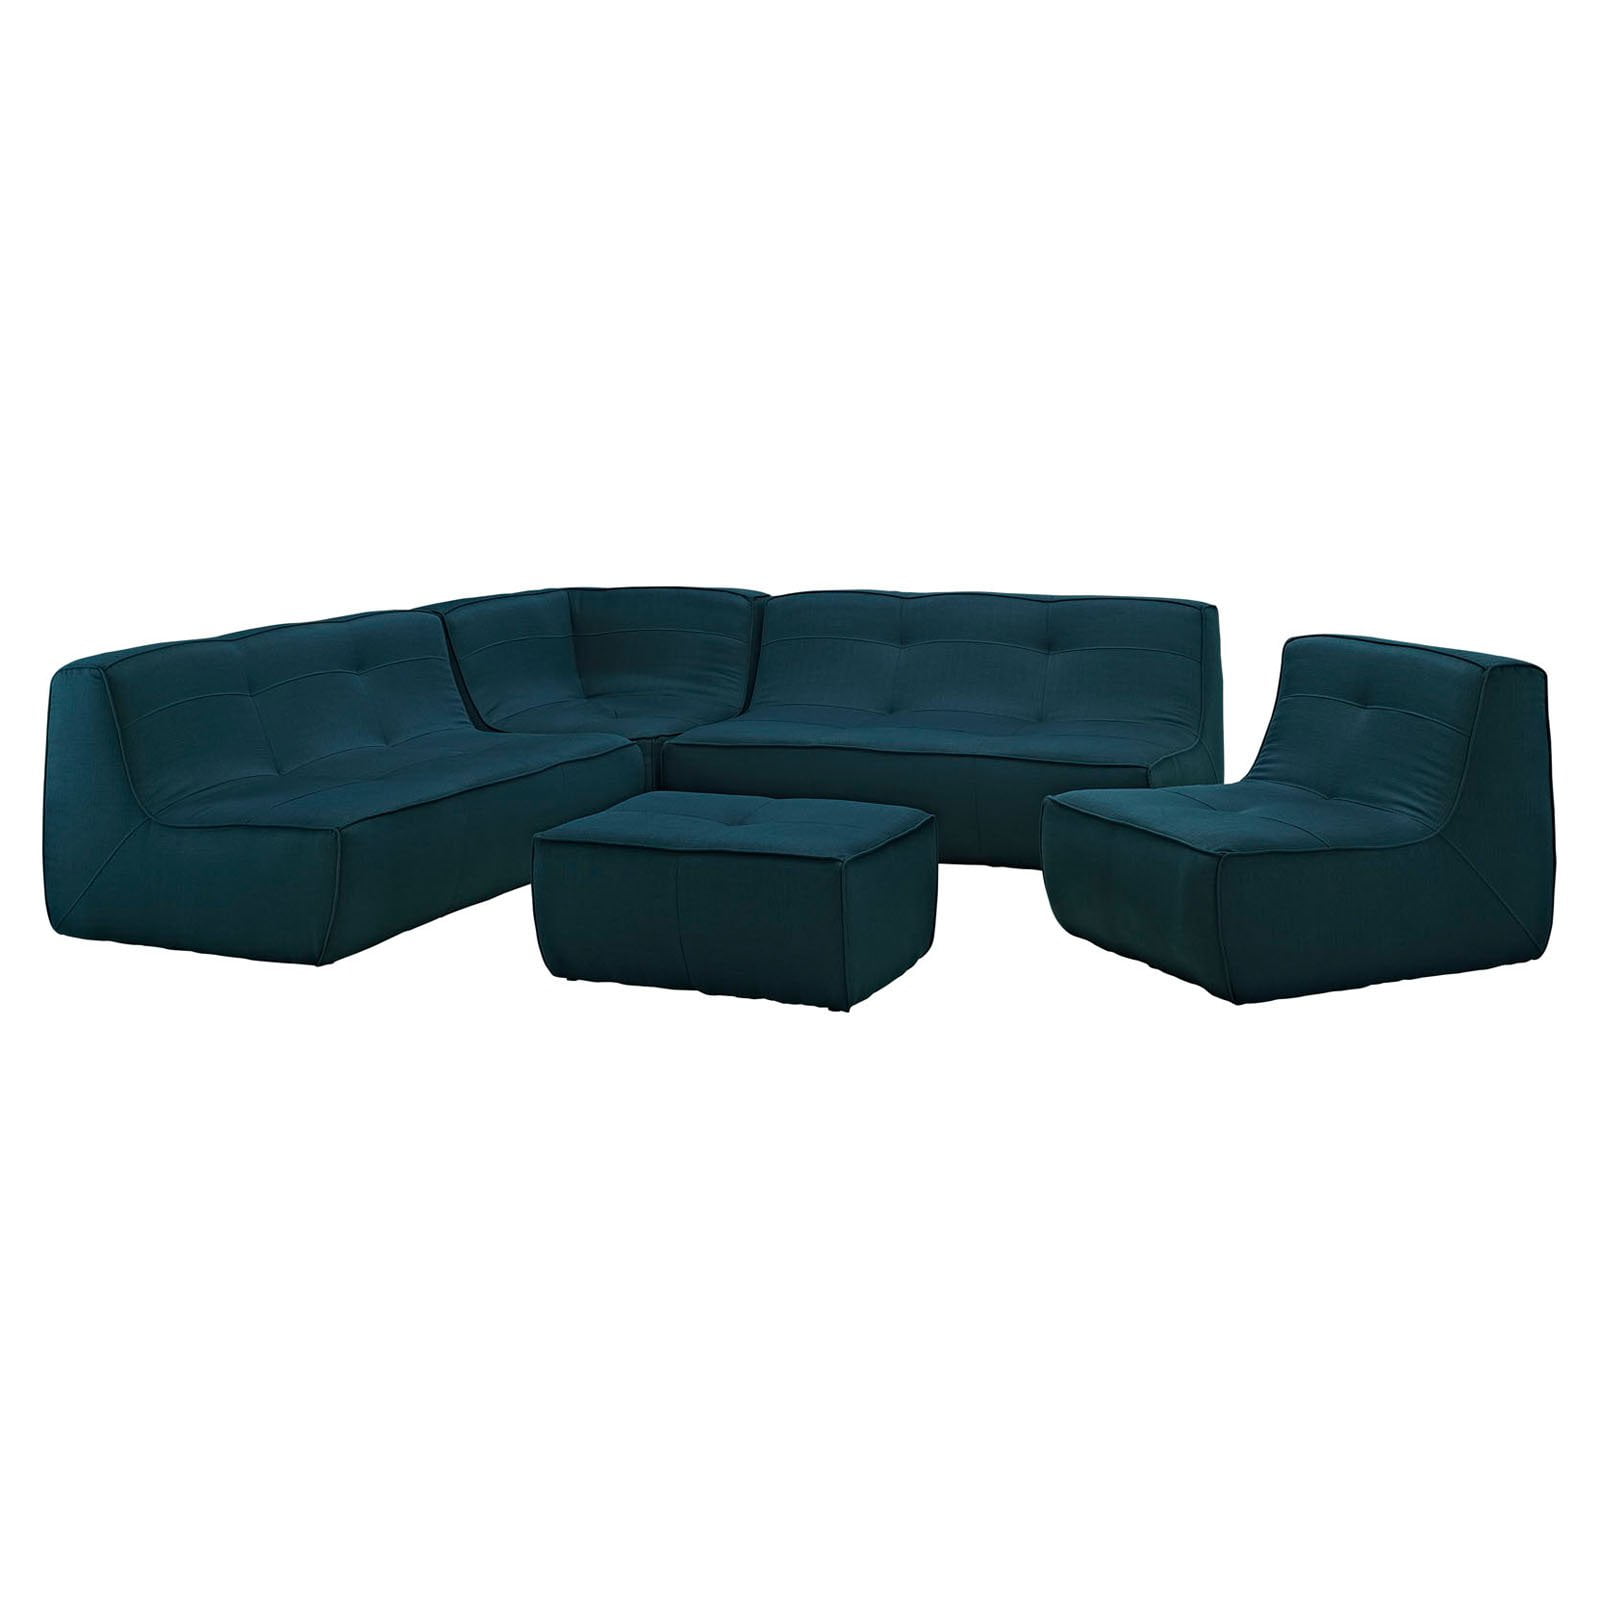 Astounding Align Azure Upholstered Sectional Sofa Set you must have